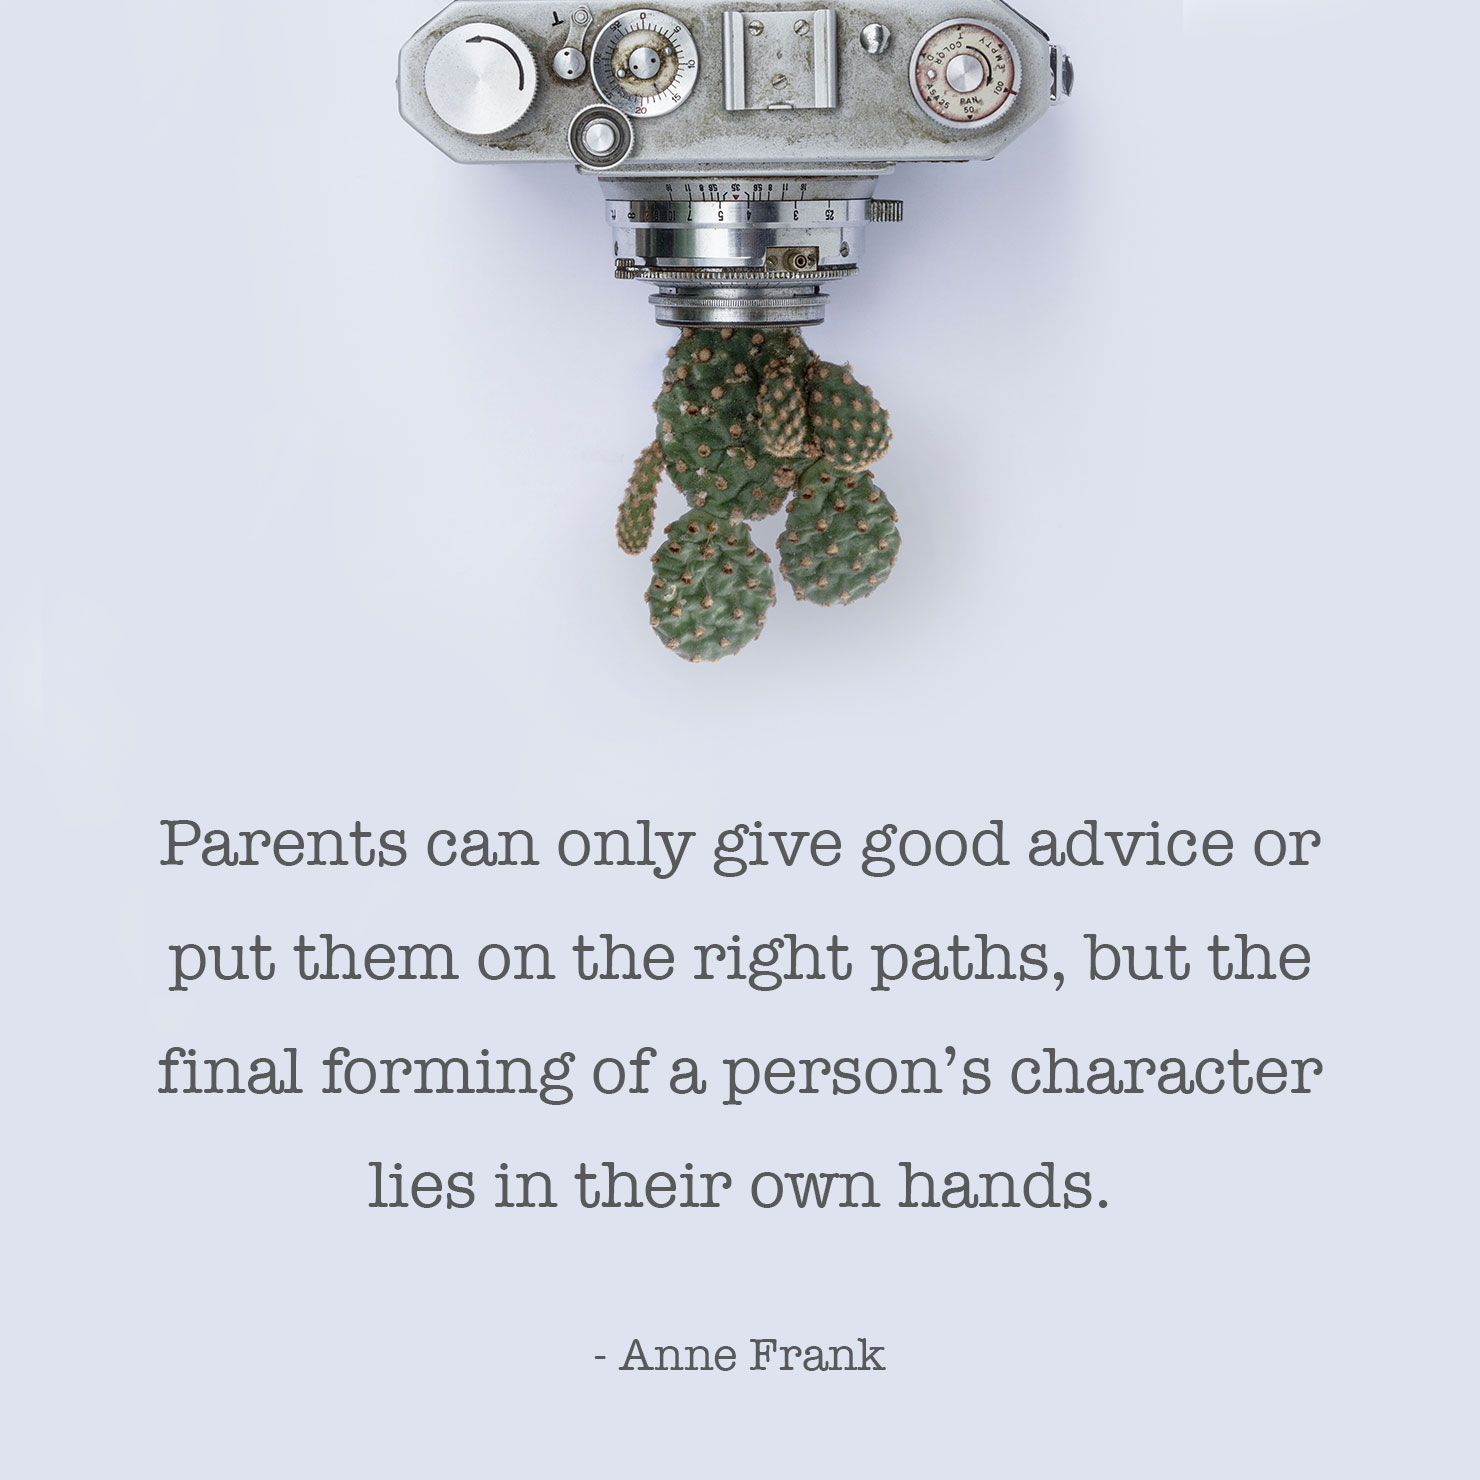 from parents graduation quote: Parents can only give good advice or put them on the right paths, but the final forming of a person's character lies in their own hands -Anne Frank 